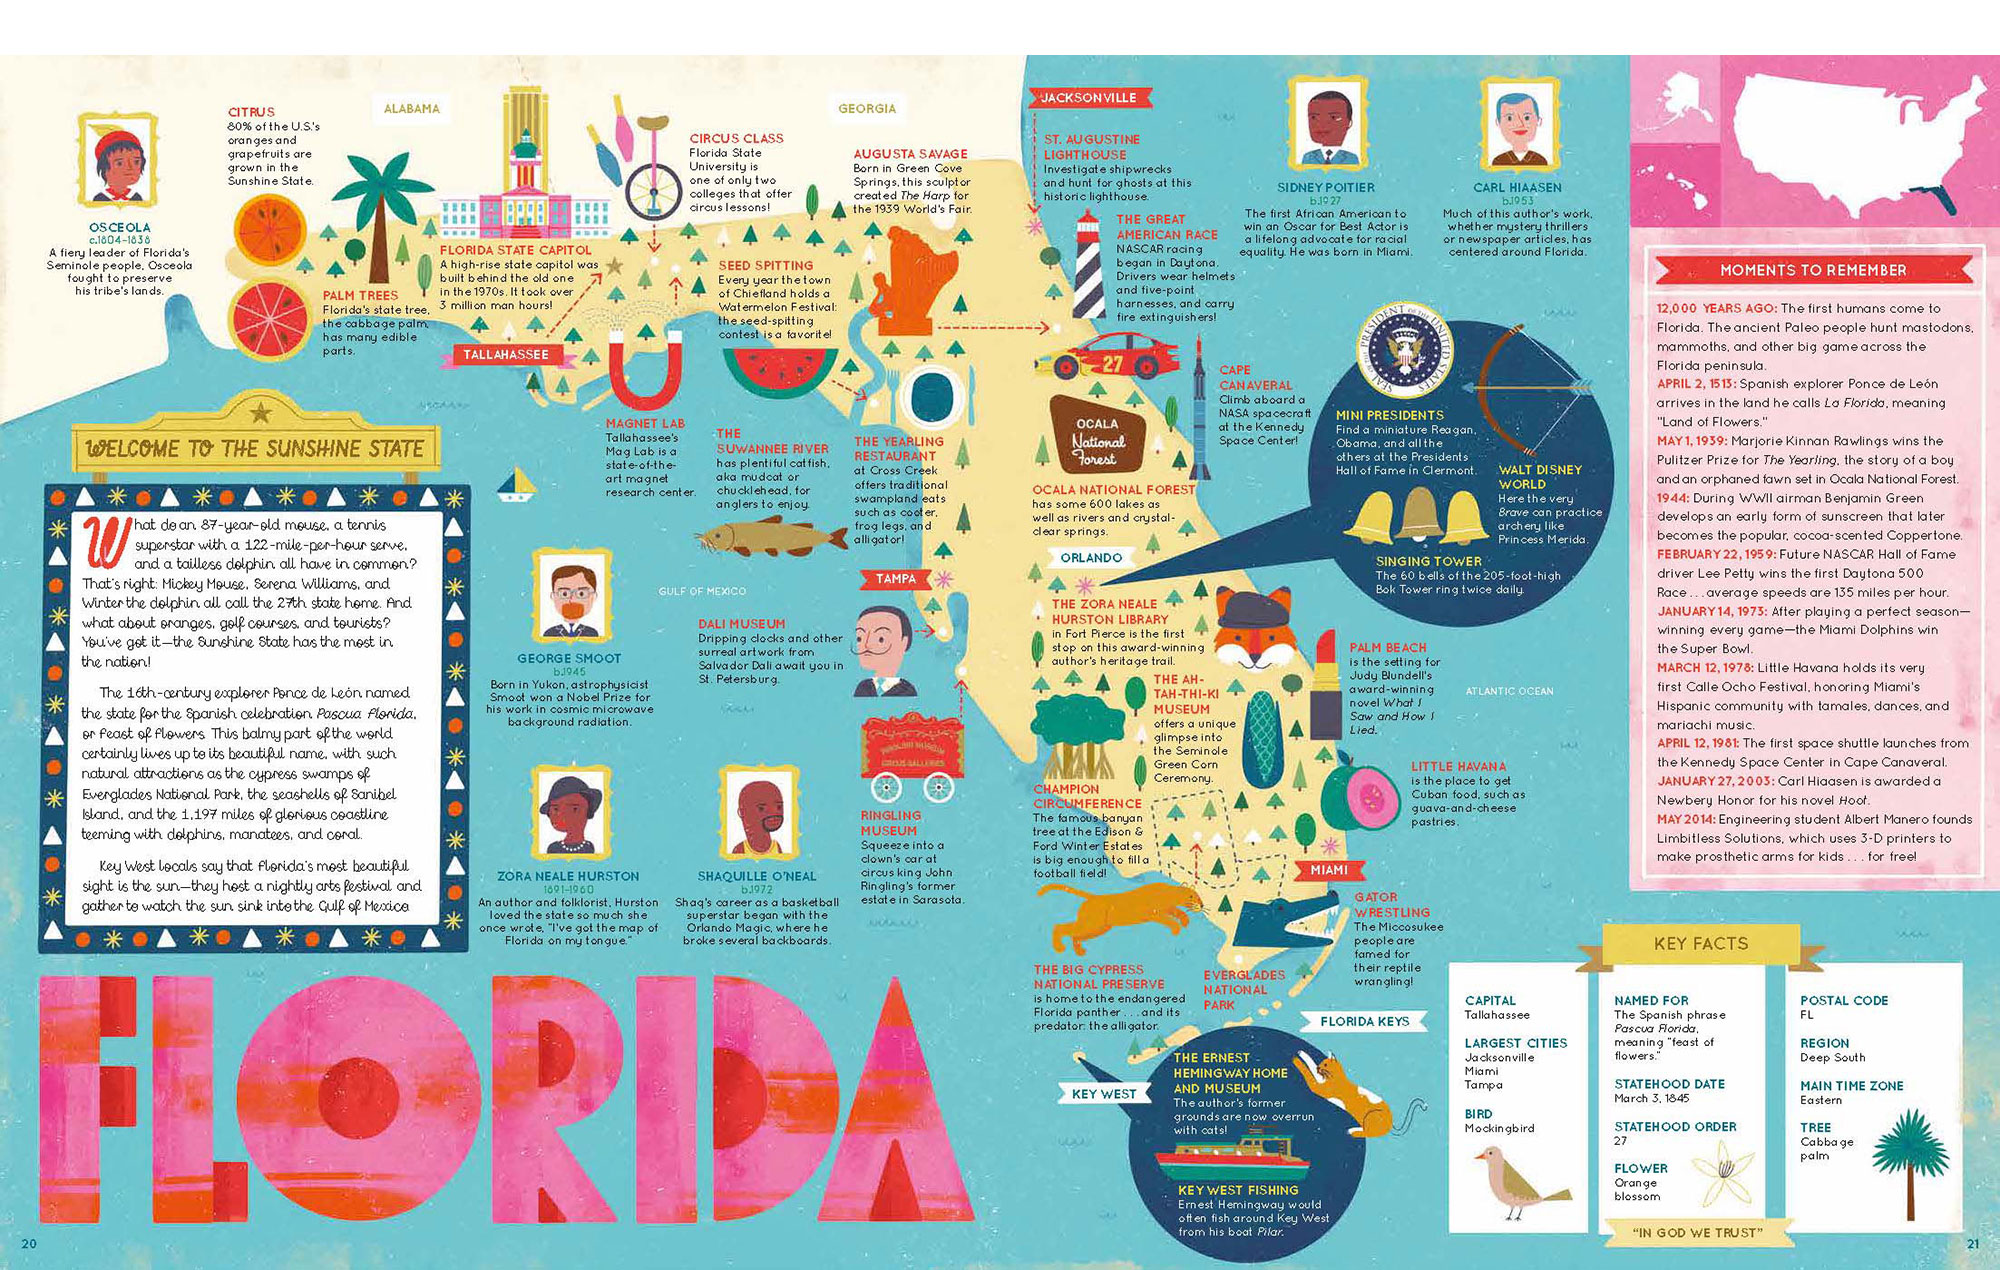 Pictorial map of Florida